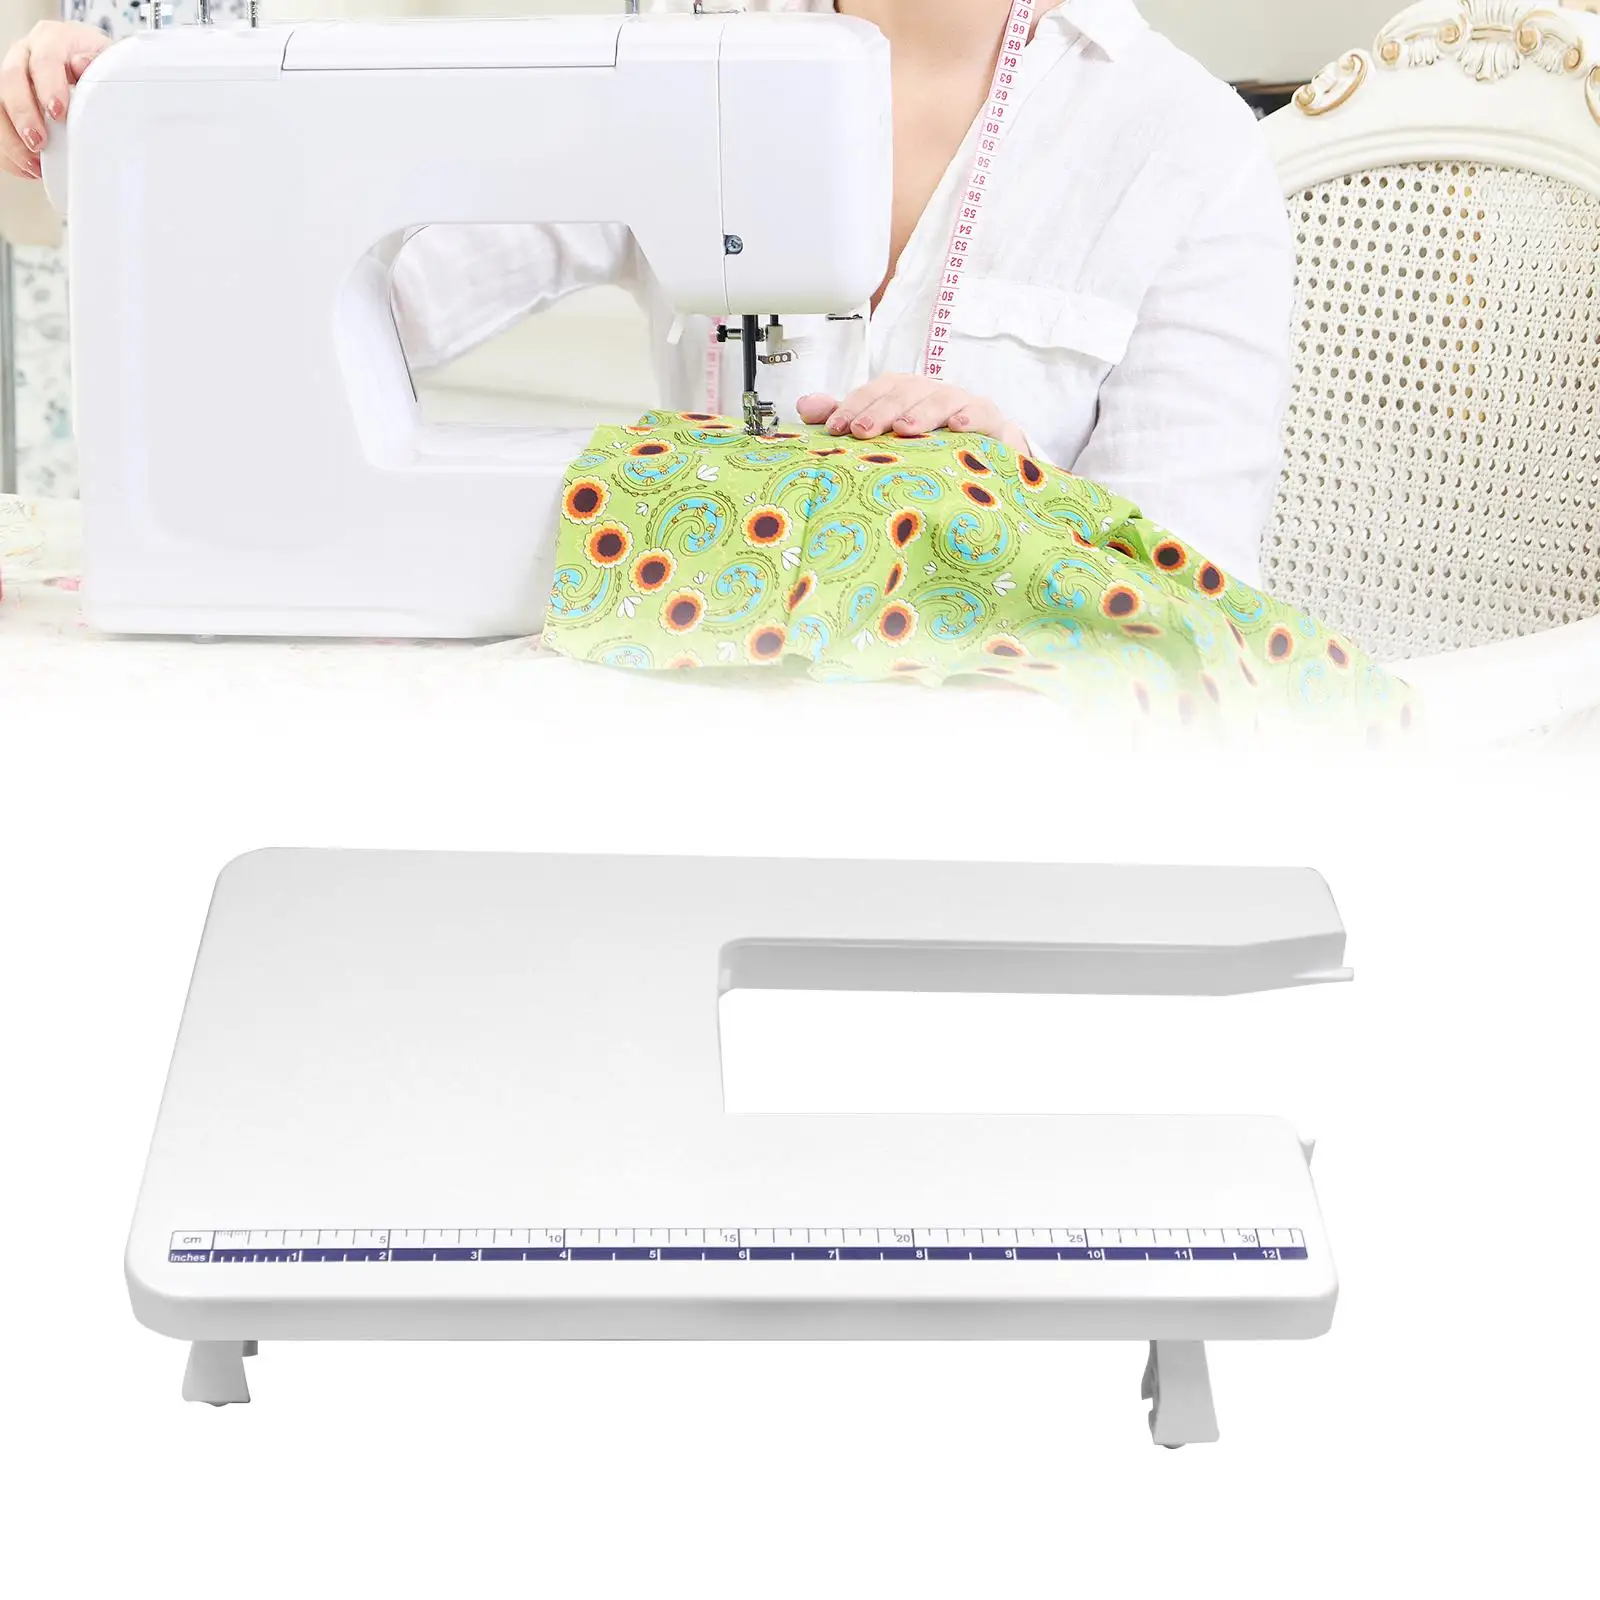 Sewing Machines Extension Table Sewing Extension Table Extension Table Board for Sewing